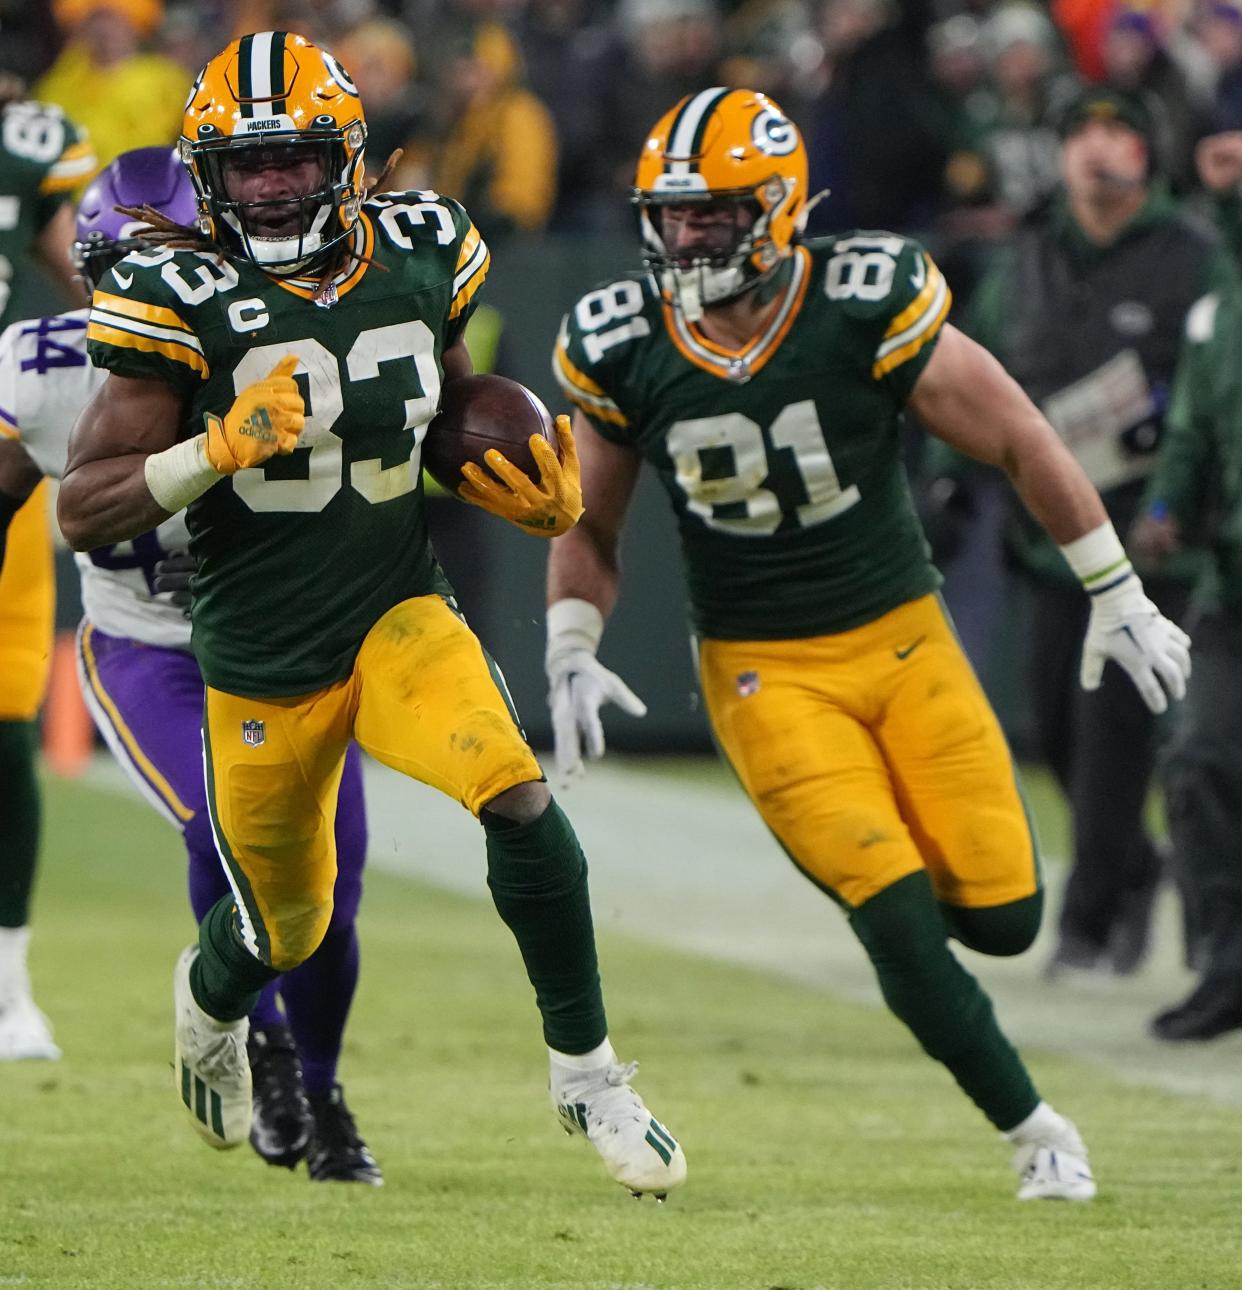 Green Bay Packers running back Aaron Jones (33) runs for 31 yards during the second quarter of their game Sunday, January 1, 2023 at Lambeau Field in Green Bay, Wis. The Green Bay Packers beat the Minnesota Vikings 41-17.